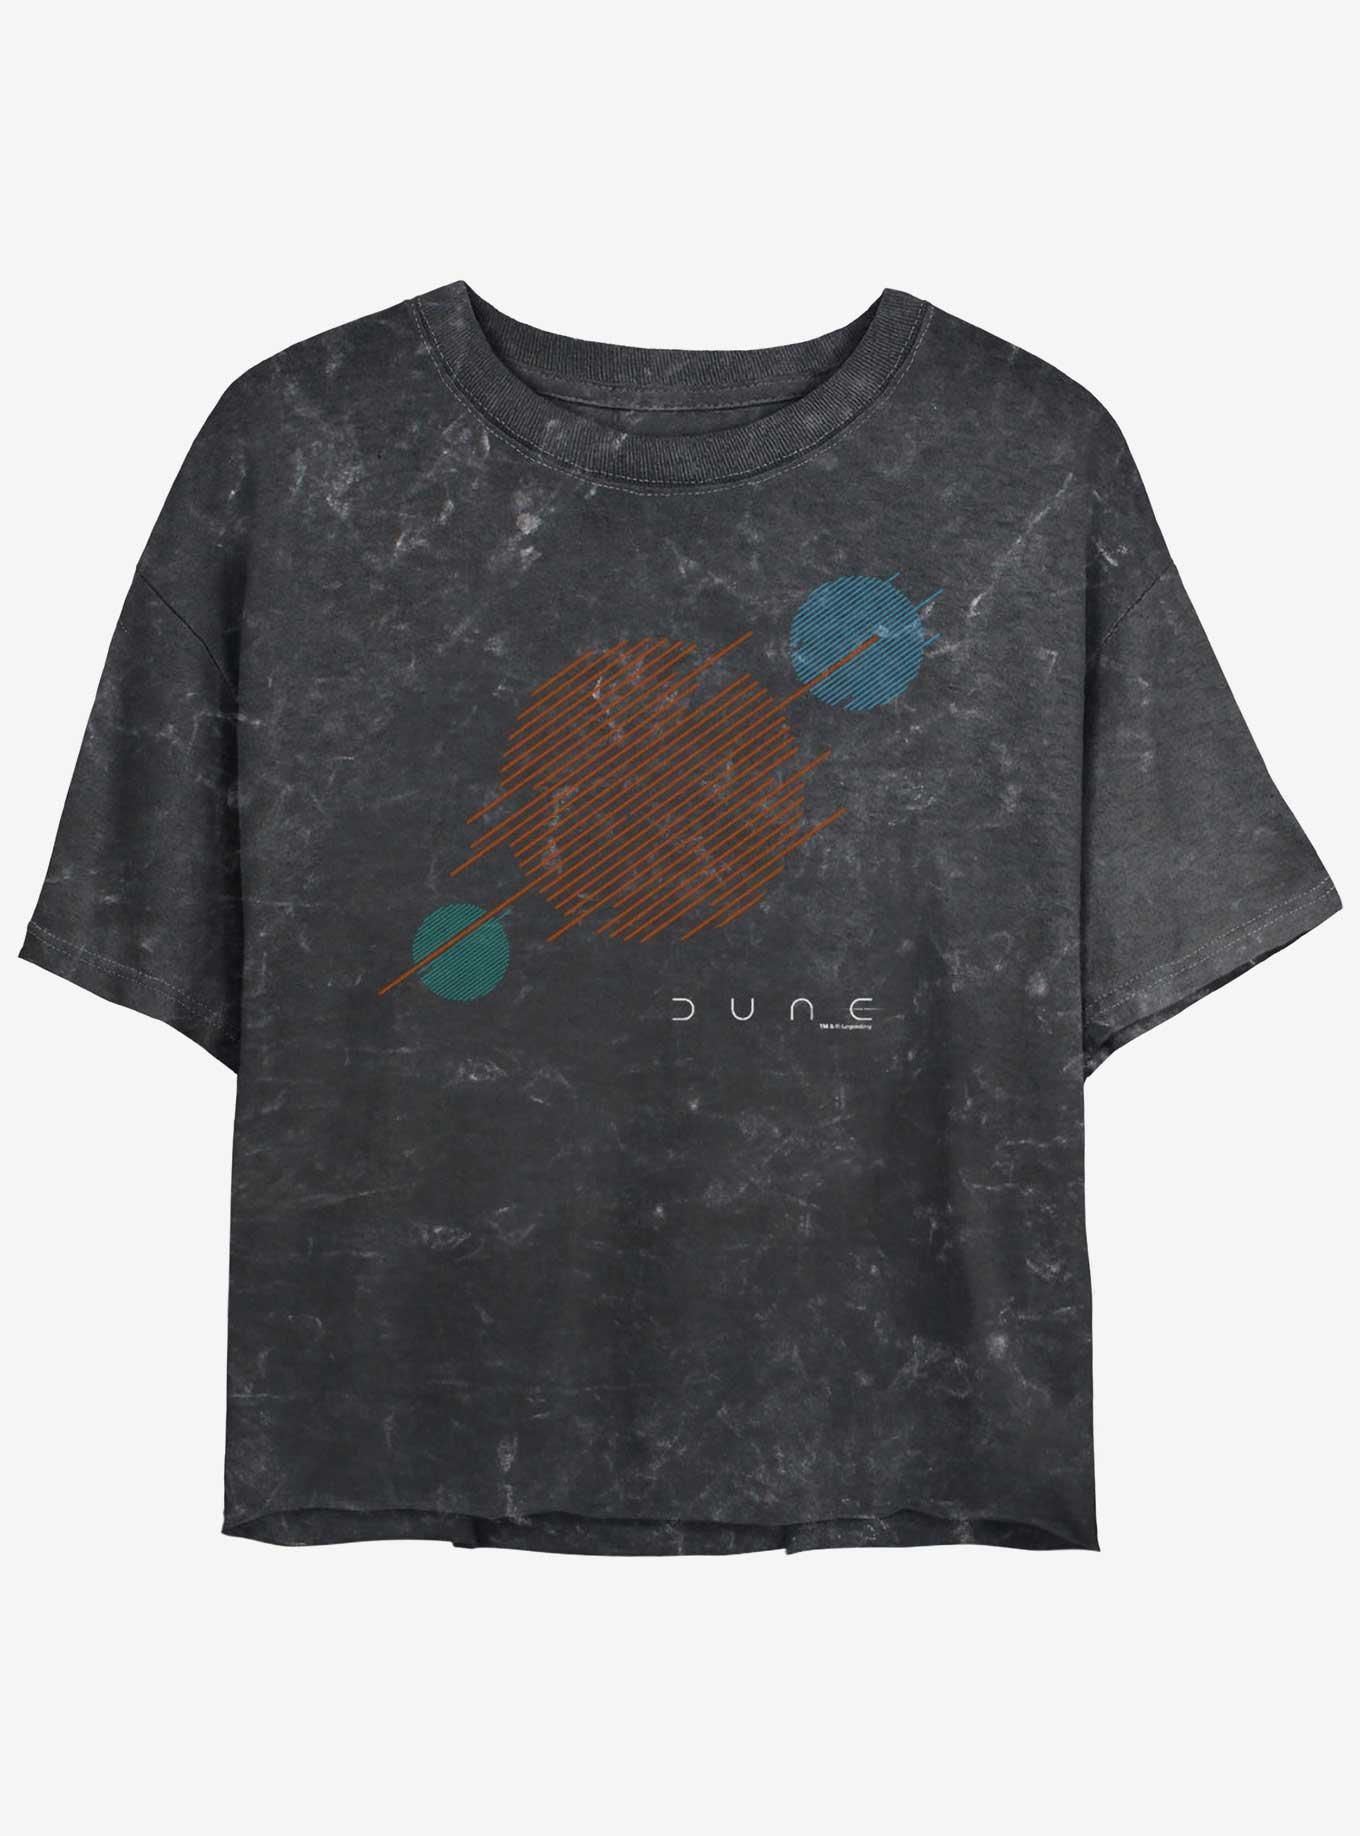 Dune: Part Two Universe Icons Mineral Wash Girls Crop T-Shirt, BLACK, hi-res